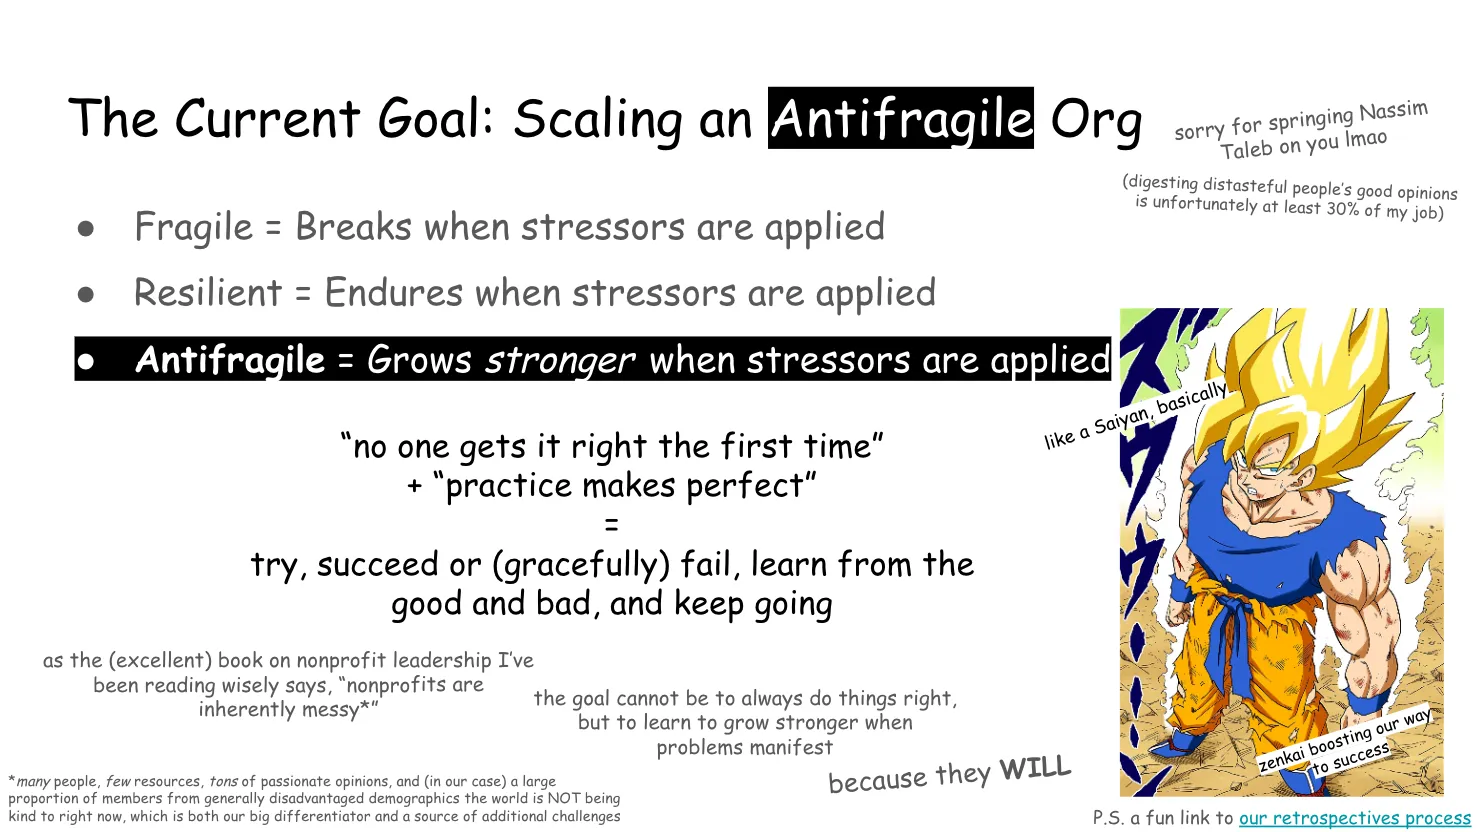 Slide 15:

Note: where the word "antifragile" appears, the text is white with a black
highlight/background.

The Current Goal: Scaling an Antifragile Org

sorry for springing Nassim Taleb on you lmao

(digesting distasteful people’s good opinions is unfortunately at least 30% of
my job)

Fragile = Breaks when stressors are applied

Resilient = Endures when stressors are applied 

Antifragile = Grows stronger when stressors are applied

“no one gets it right the first time” + “practice makes perfect” = try, succeed
or (gracefully) fail, learn from the good and bad, and keep going

To the right is an image of Goku going Super Saiyan and intensely looking up at
the camera.

like a Saiyan, basically

zenkai boosting our way to success

as the (excellent) book on nonprofit leadership I’ve been reading wisely says,
“nonprofits are inherently messy*”

the goal cannot be to always do things right, but to learn to grow stronger when
problems manifest because they WILL

*many people, few resources, tons of passionate opinions, and (in our case) a
large proportion of members from generally disadvantaged demographics the world
is NOT being kind to right now, which is both our big differentiator and a
source of additional challenges